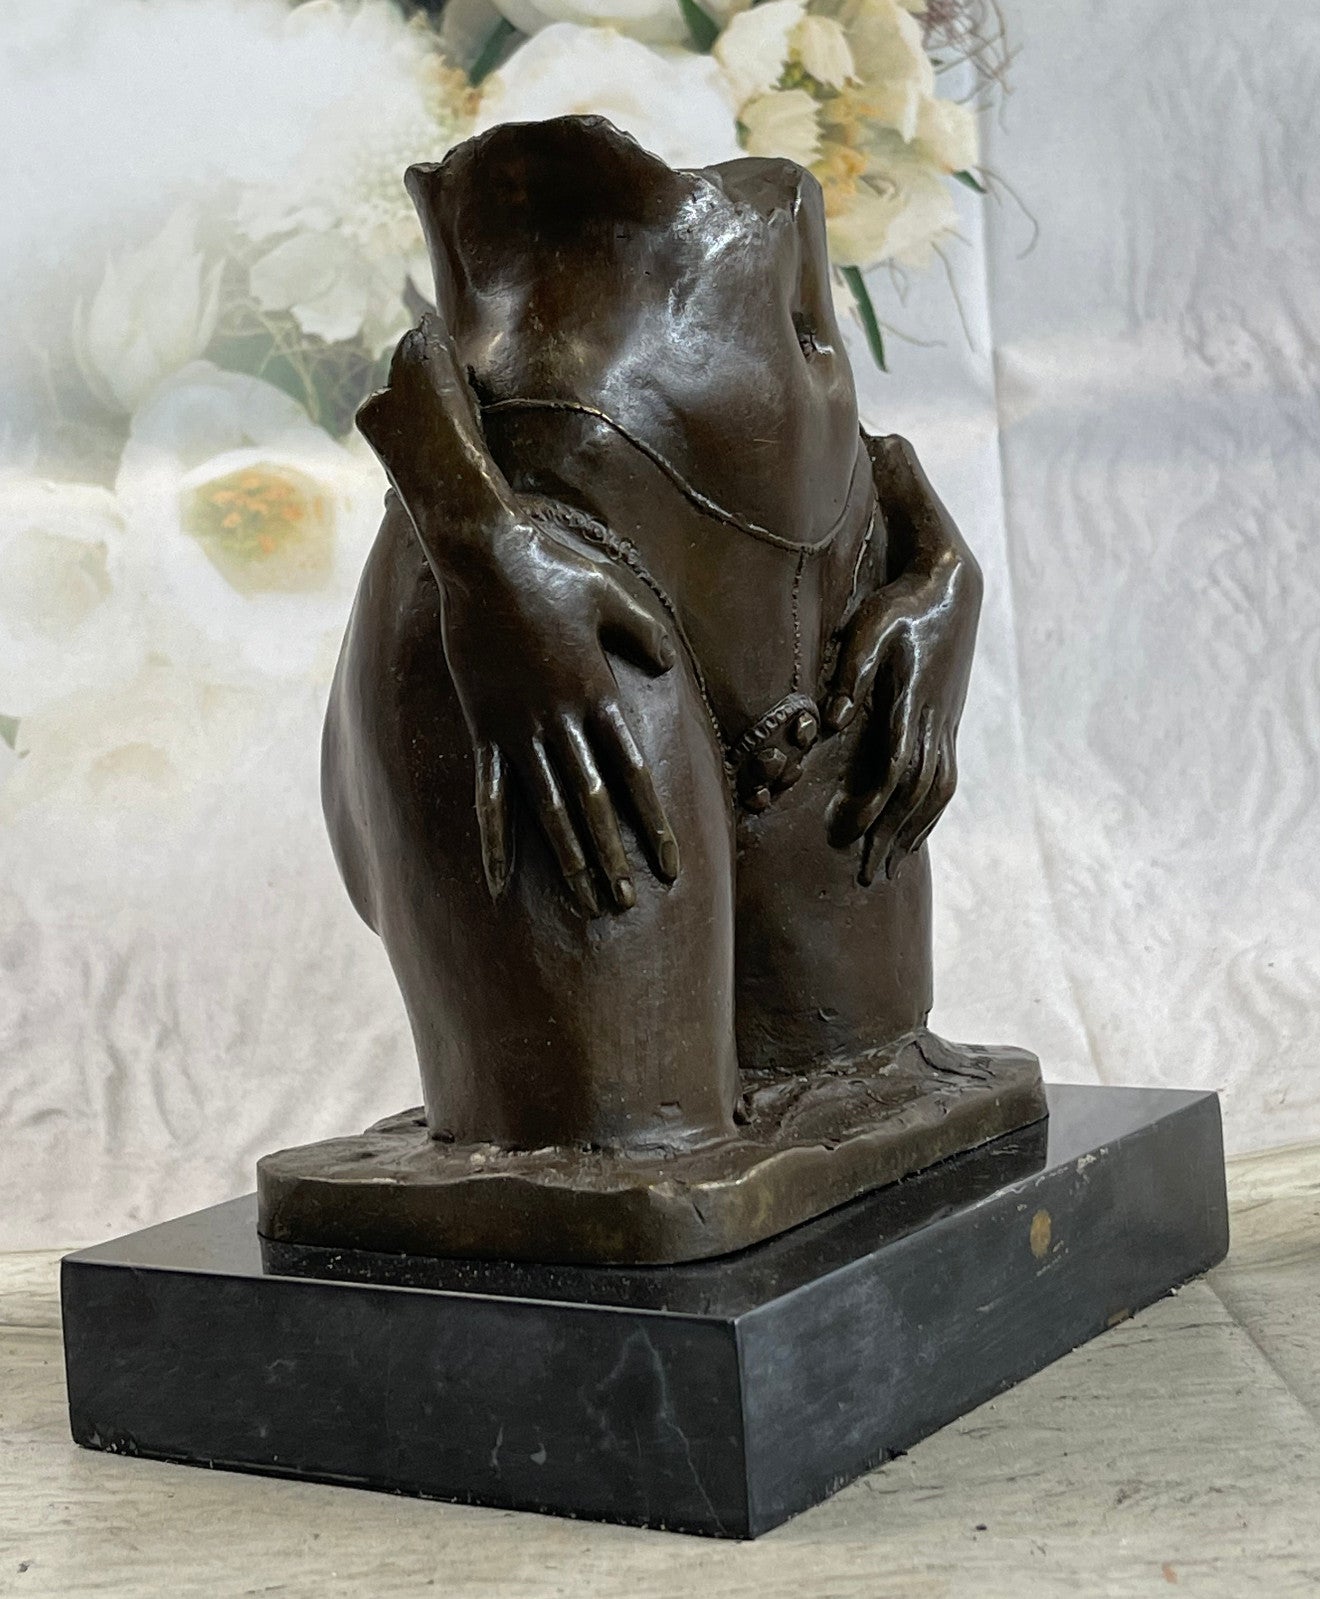 Handcrafted bronze sculpture SALE Torso Female Nude Abstract Edition Collector